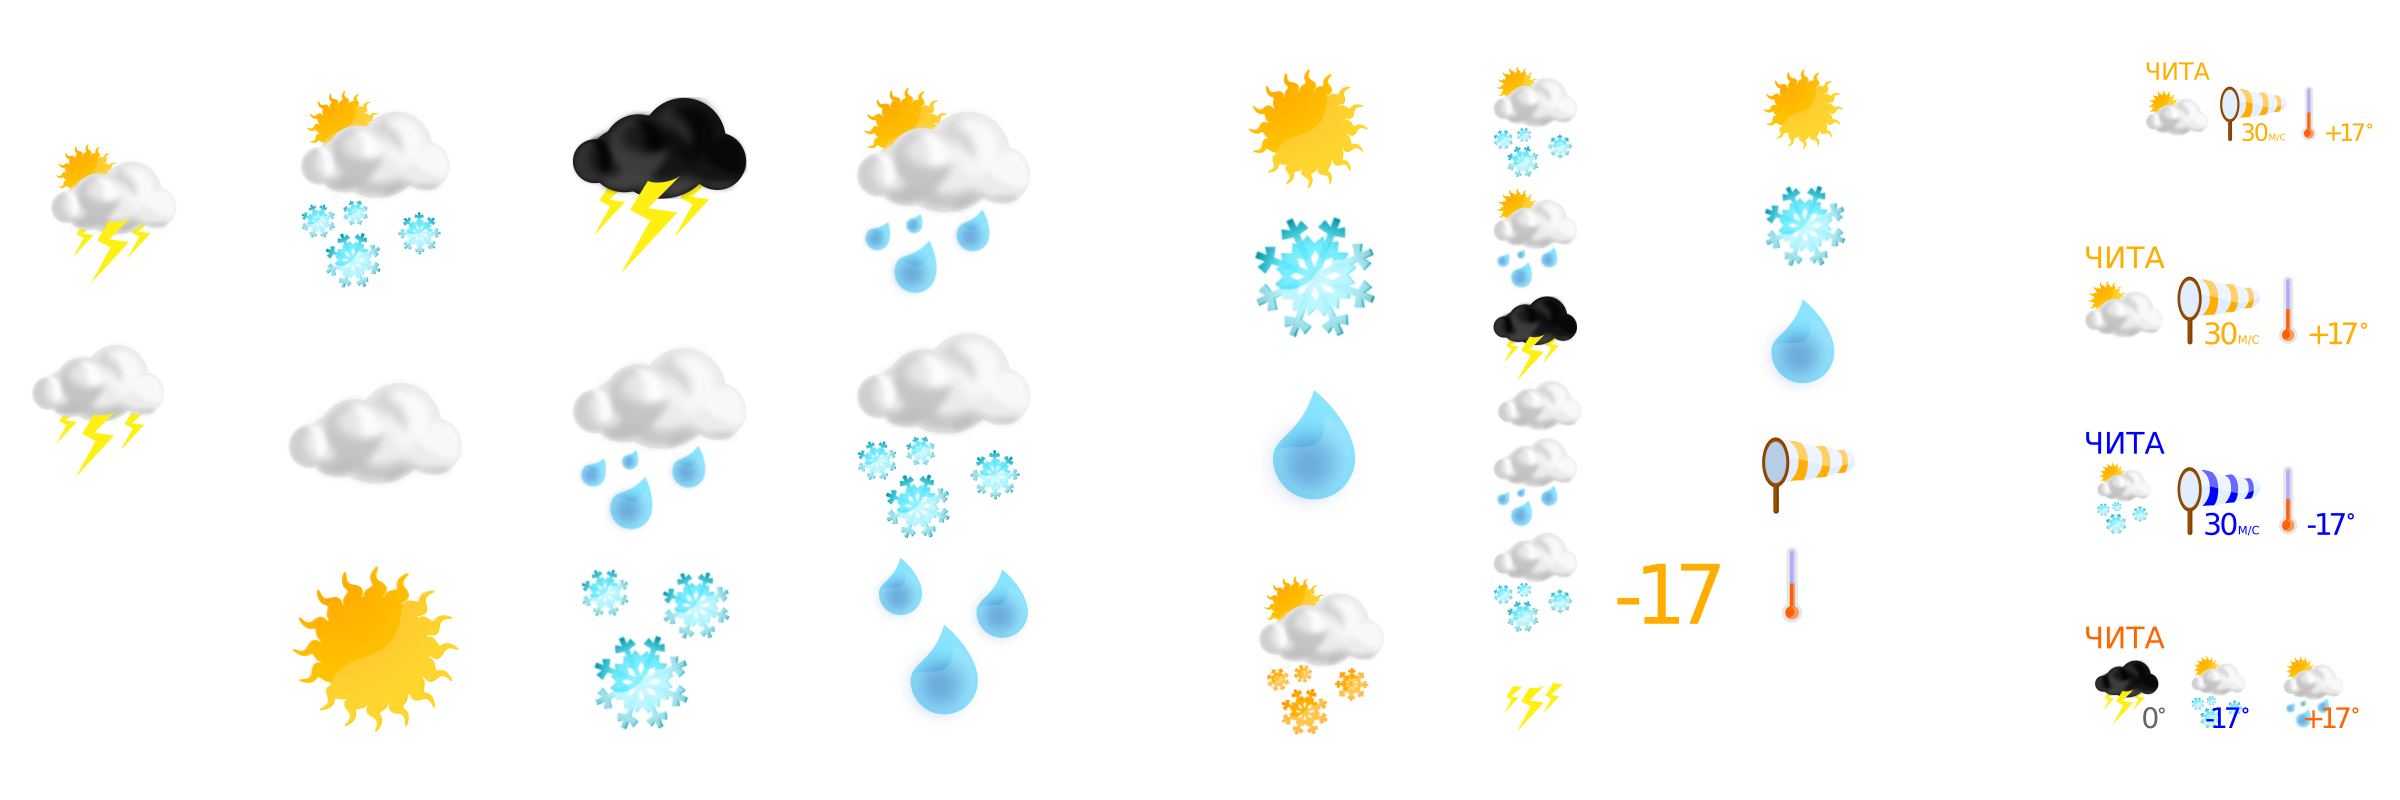 weather icons clipart free - photo #33